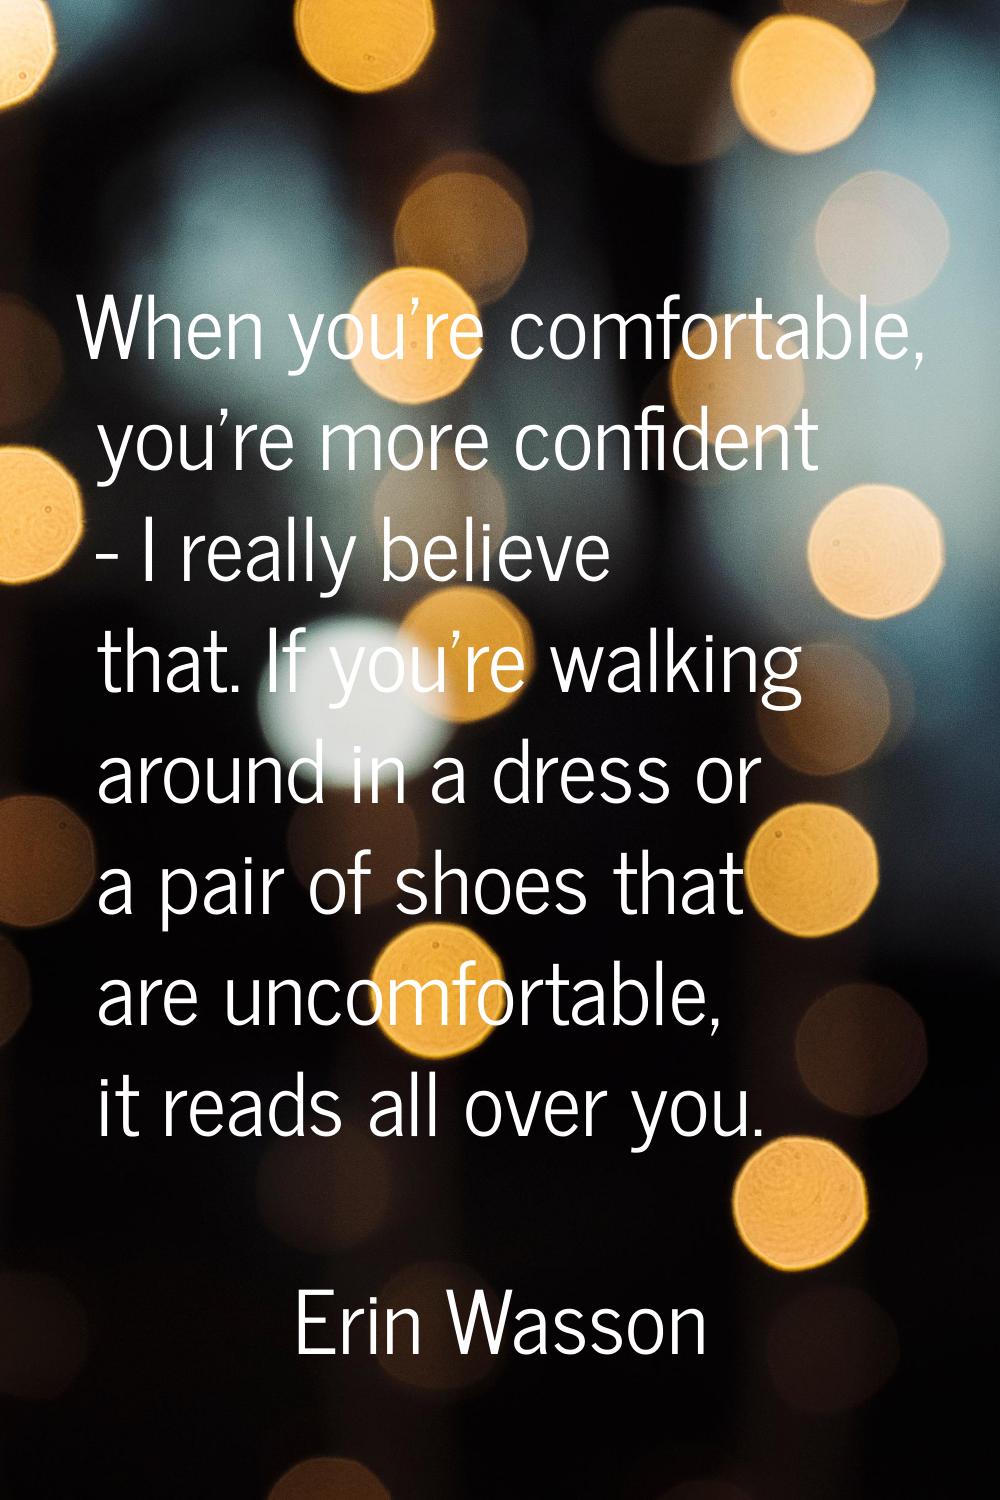 When you're comfortable, you're more confident - I really believe that. If you're walking around in